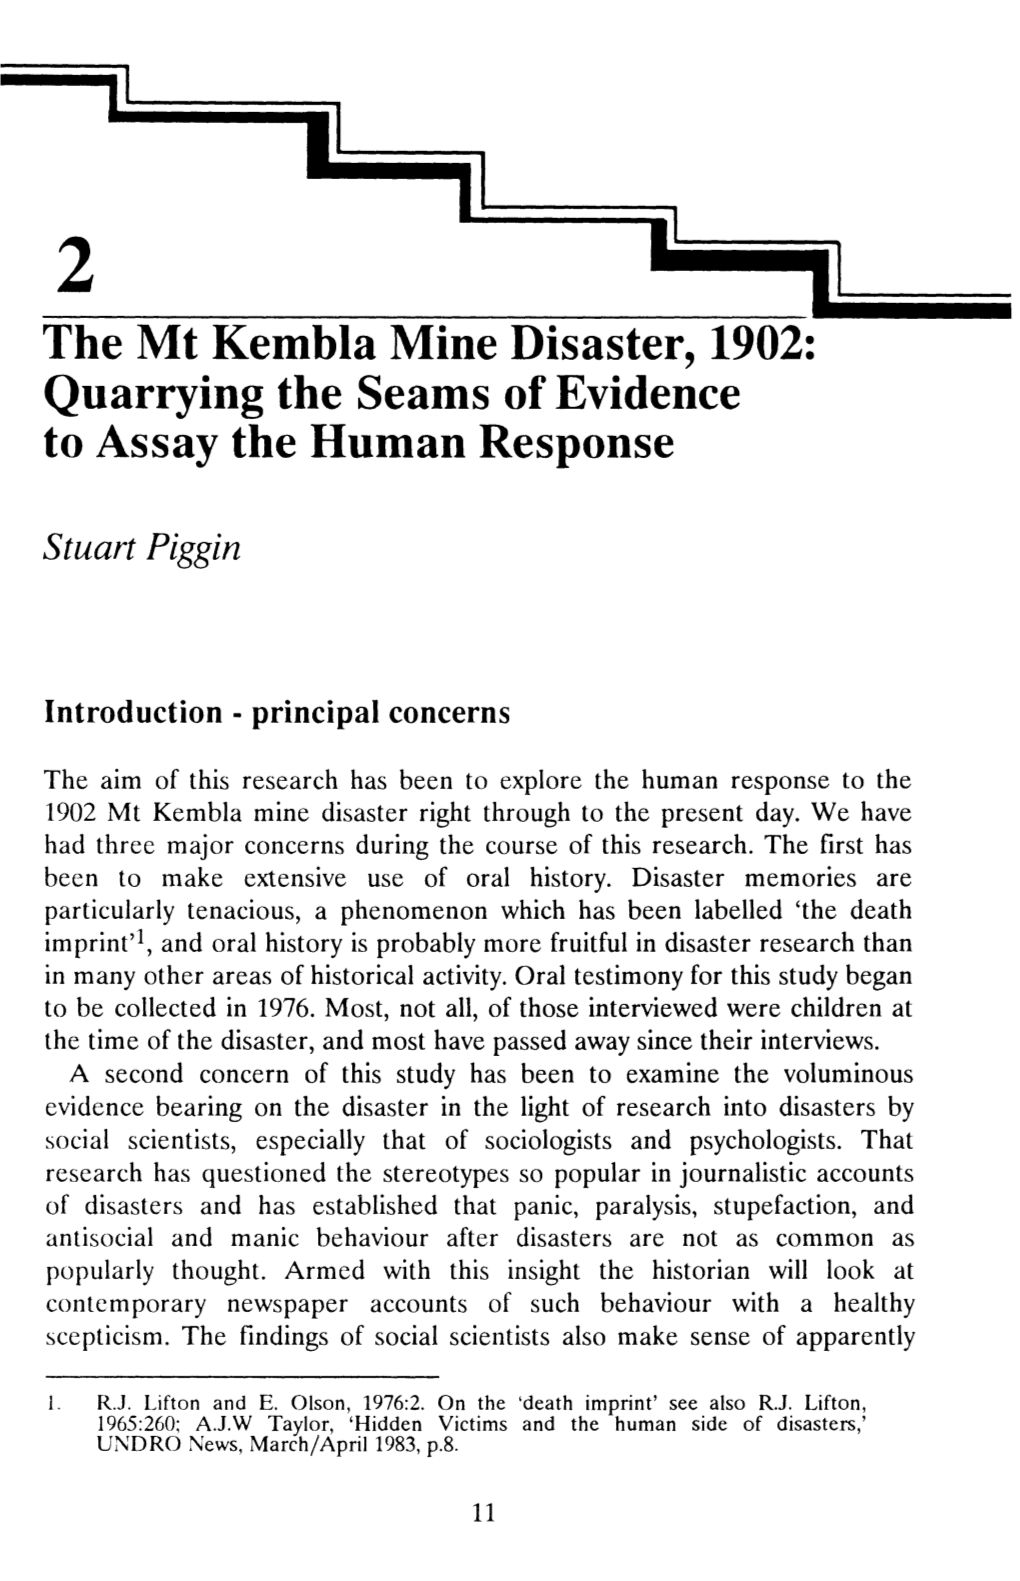 The Mt Kembla Mine Disaster, 1902: Quarrying the Seams of Evidence to Assay the Human Response